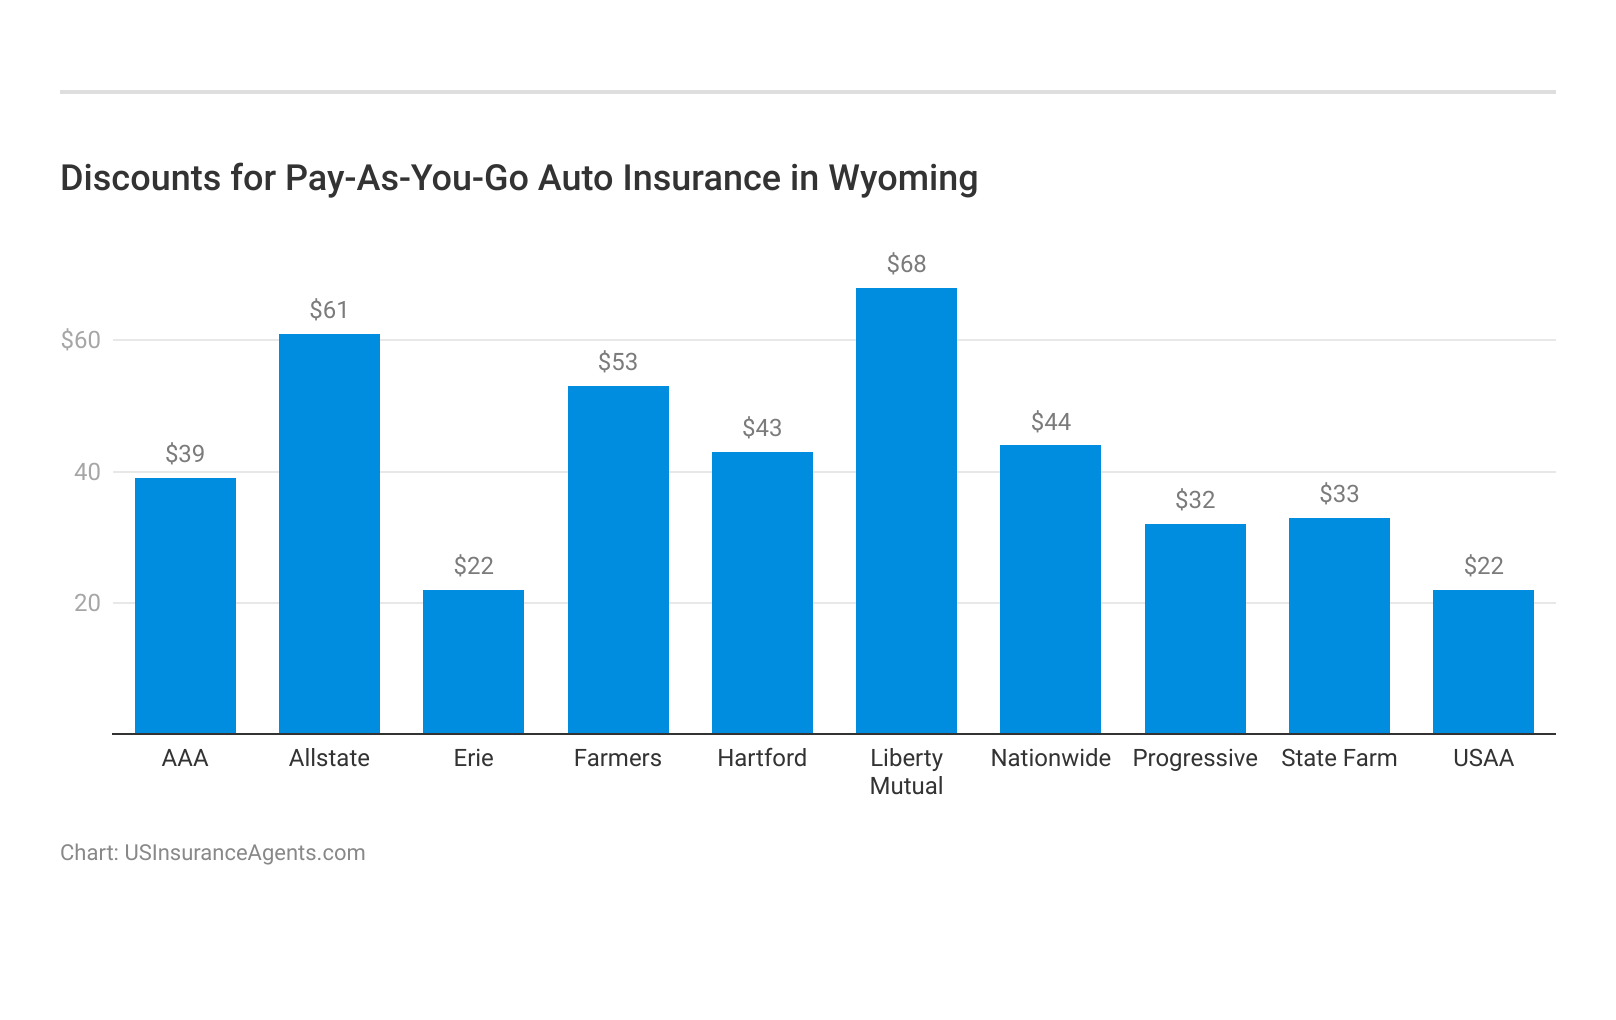 <h3>Discounts for Pay-As-You-Go Auto Insurance in Wyoming</h3>